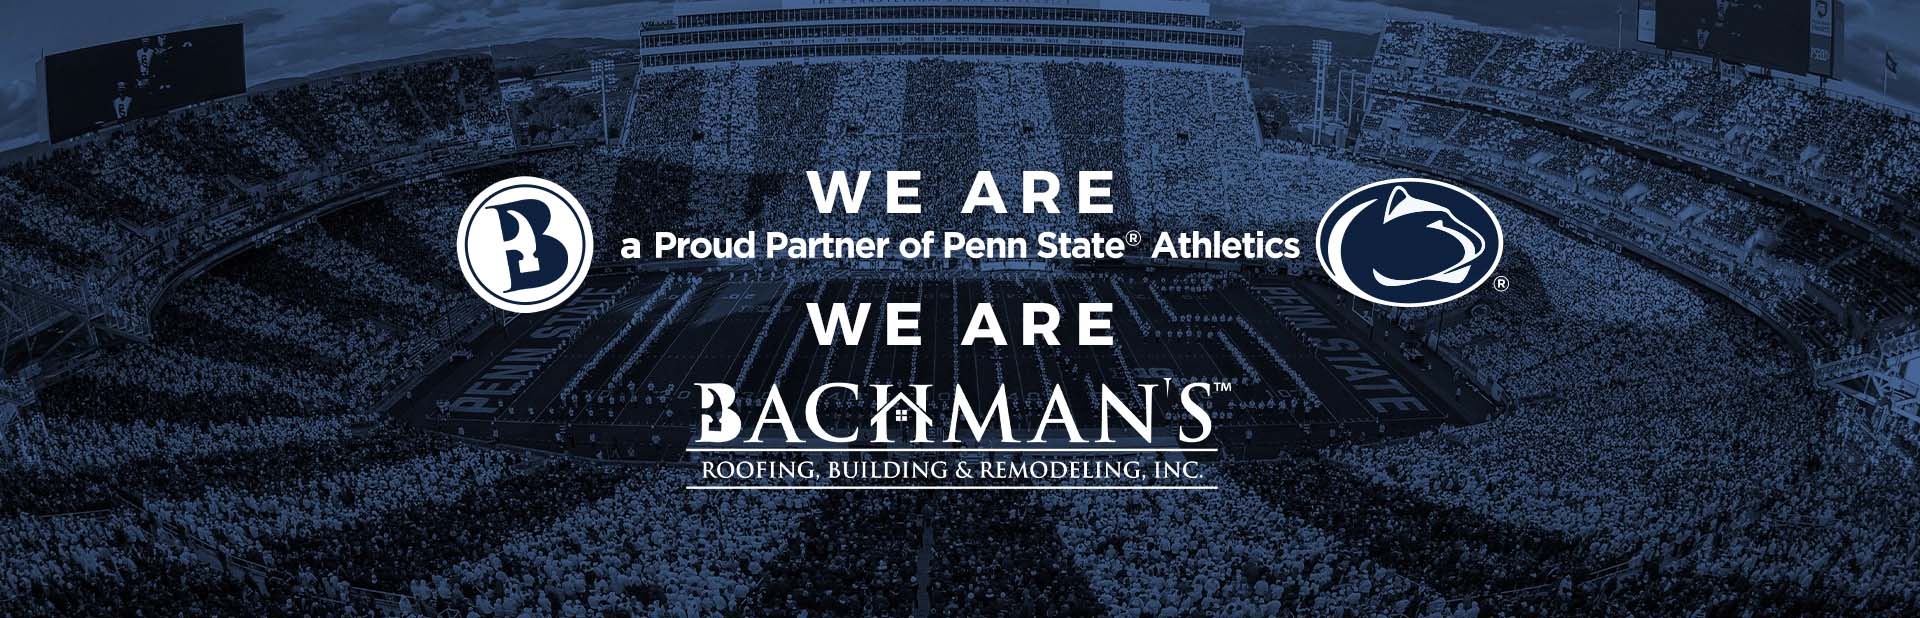 WE ARE a proud partner of Penn State Athletics